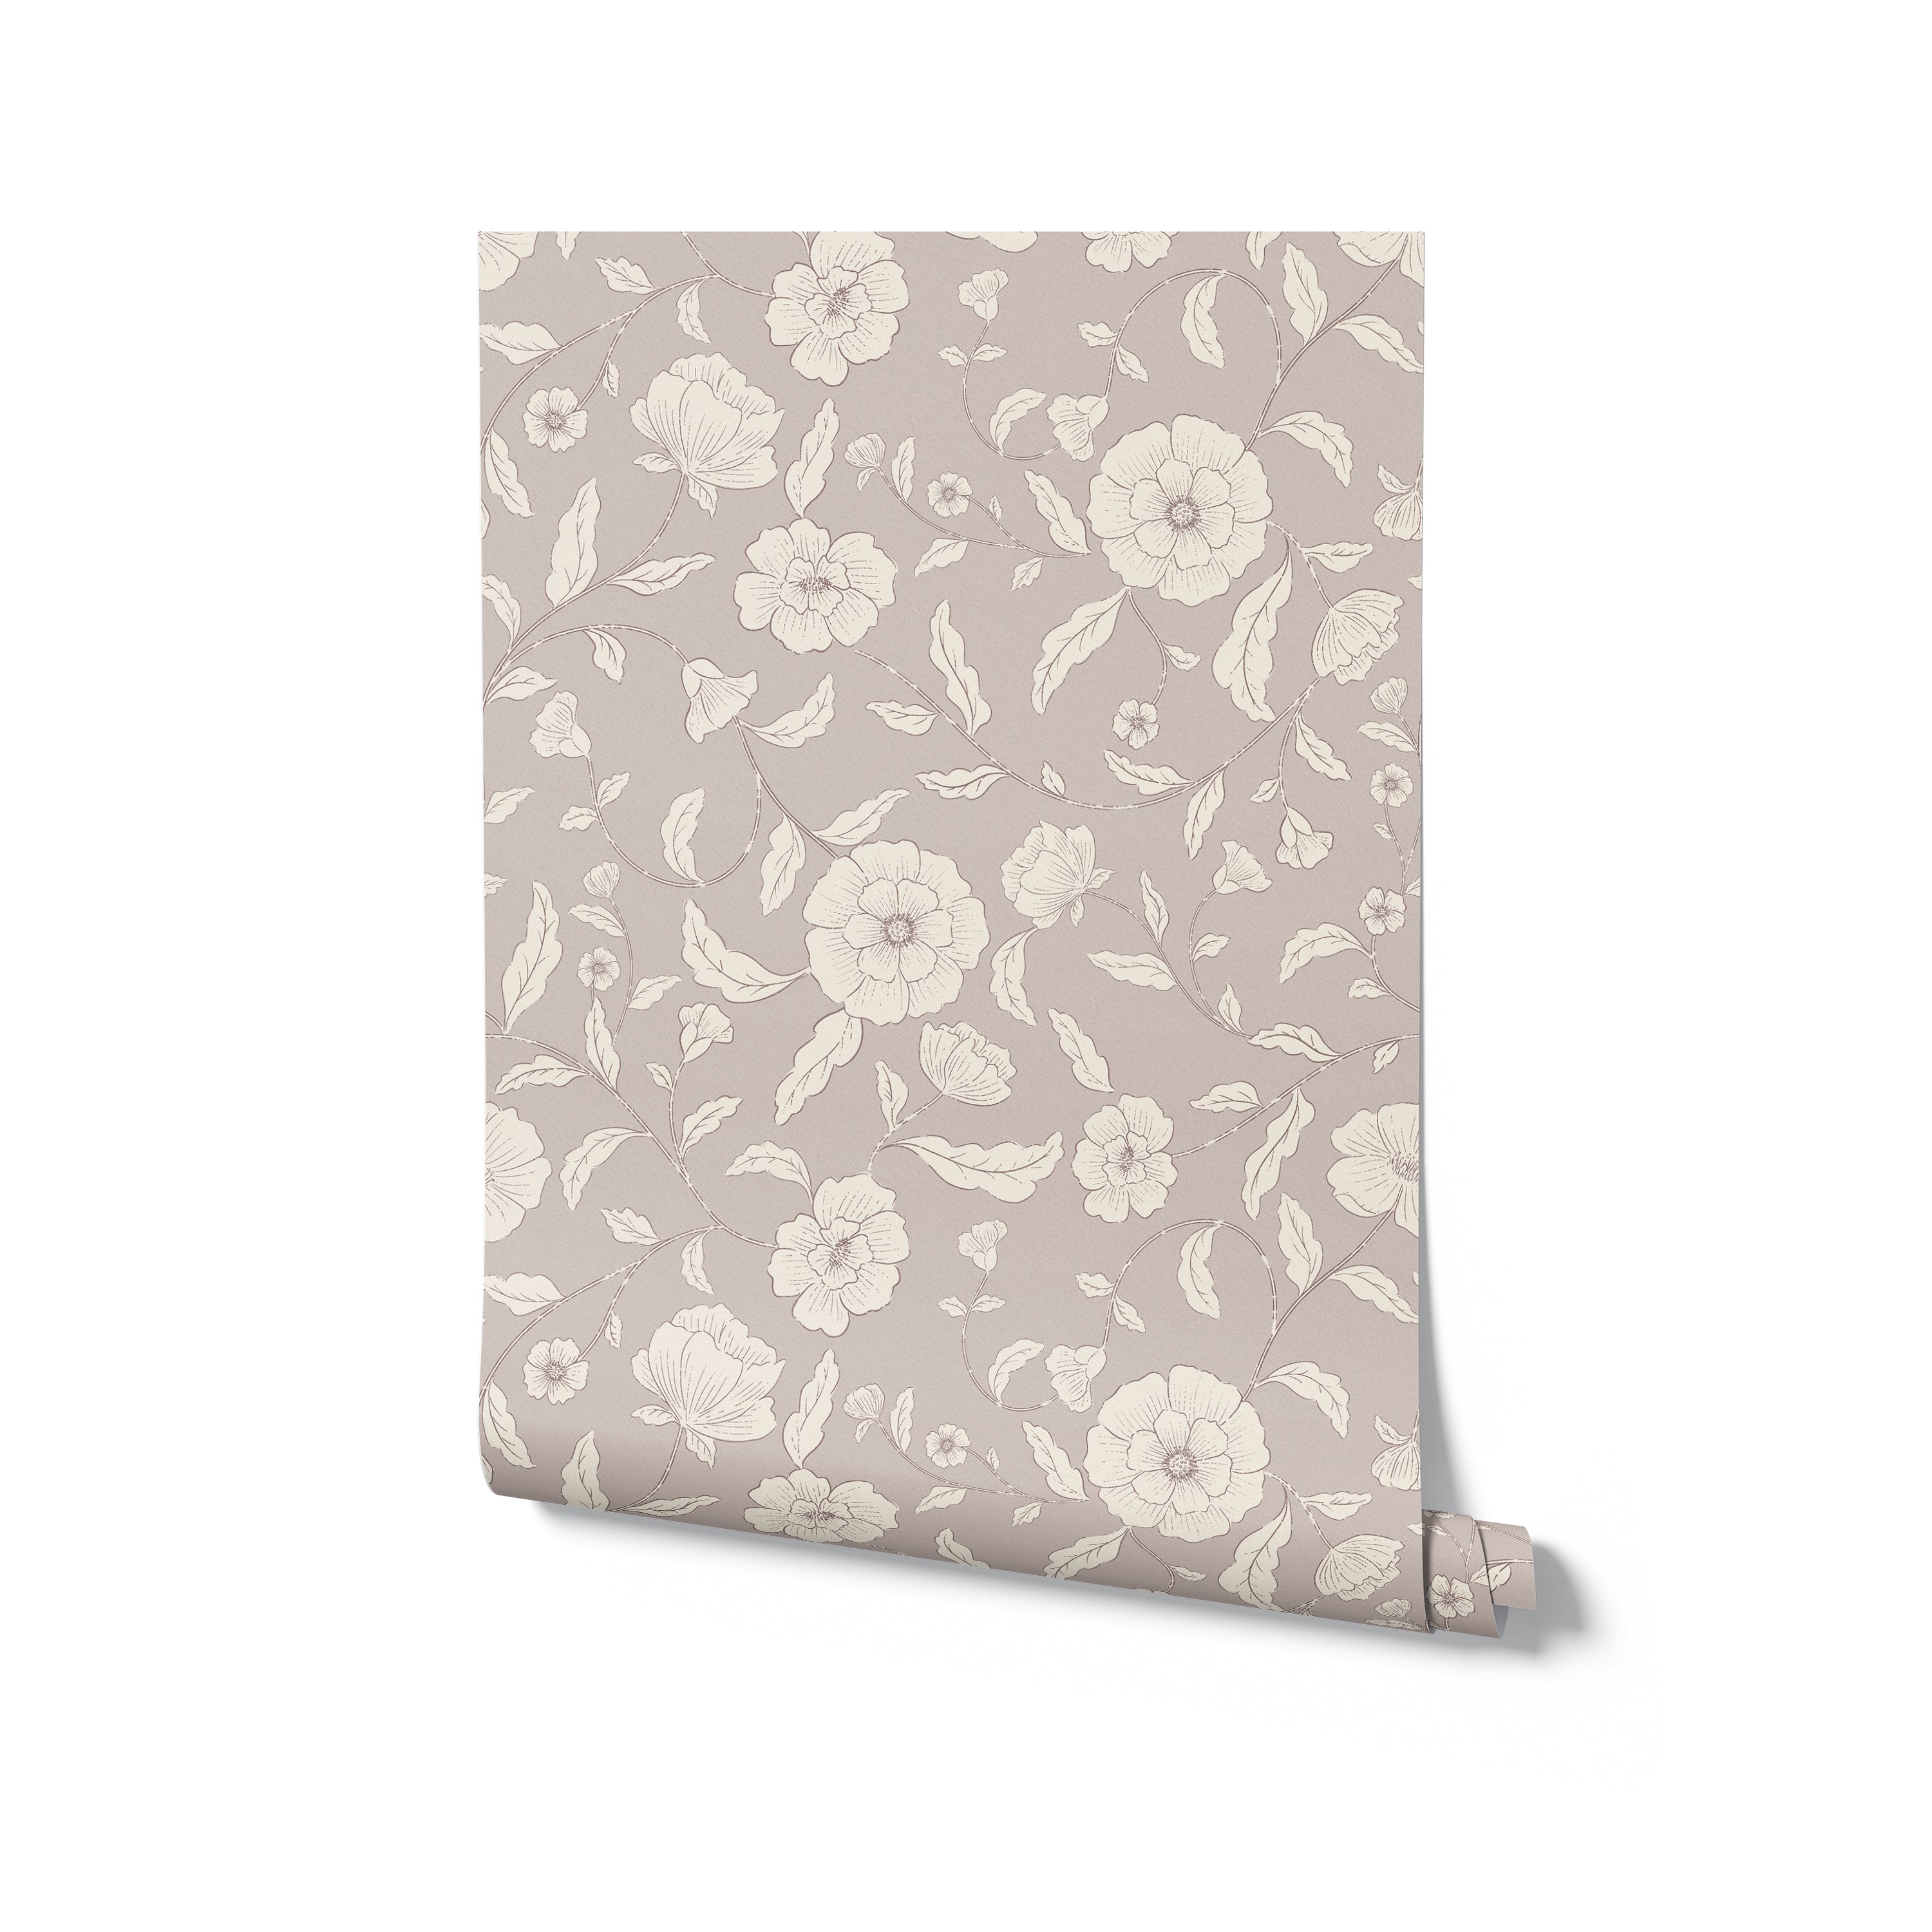 A roll of Petit Champlain Wallpaper displaying its large floral pattern in greyed lavender. The wallpaper is neatly rolled, highlighting the detailed and refined design, perfect for adding a touch of elegance to any room